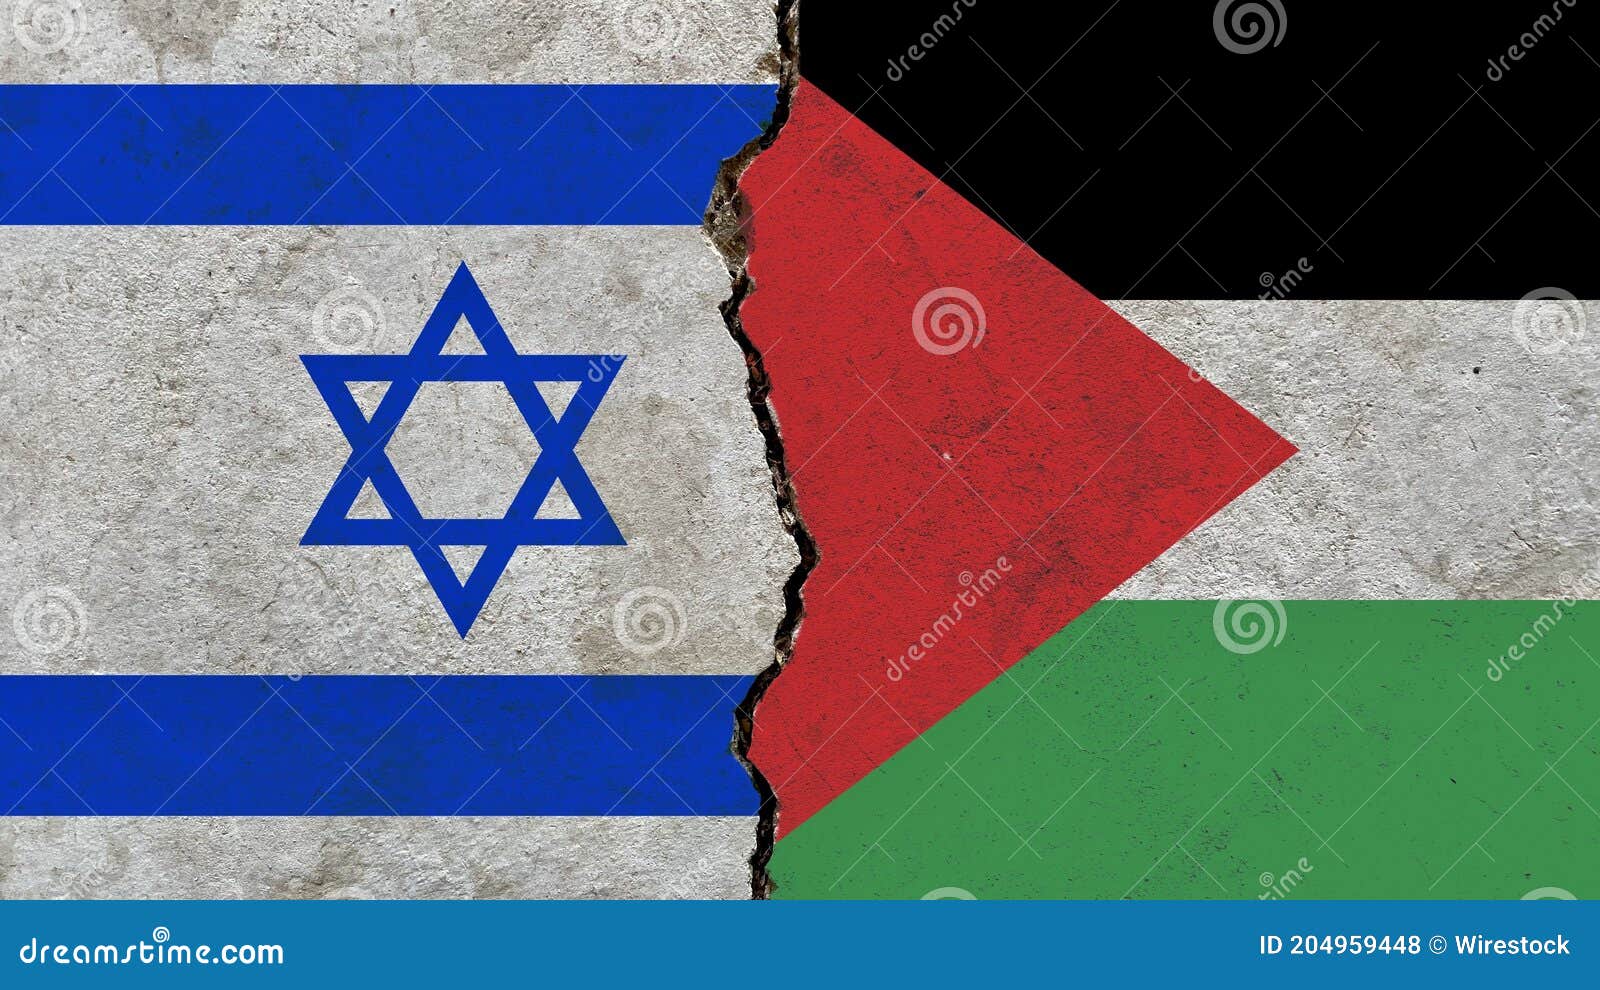 palestinian and israeli flag on a cracked wall-politics, war, conflict concept